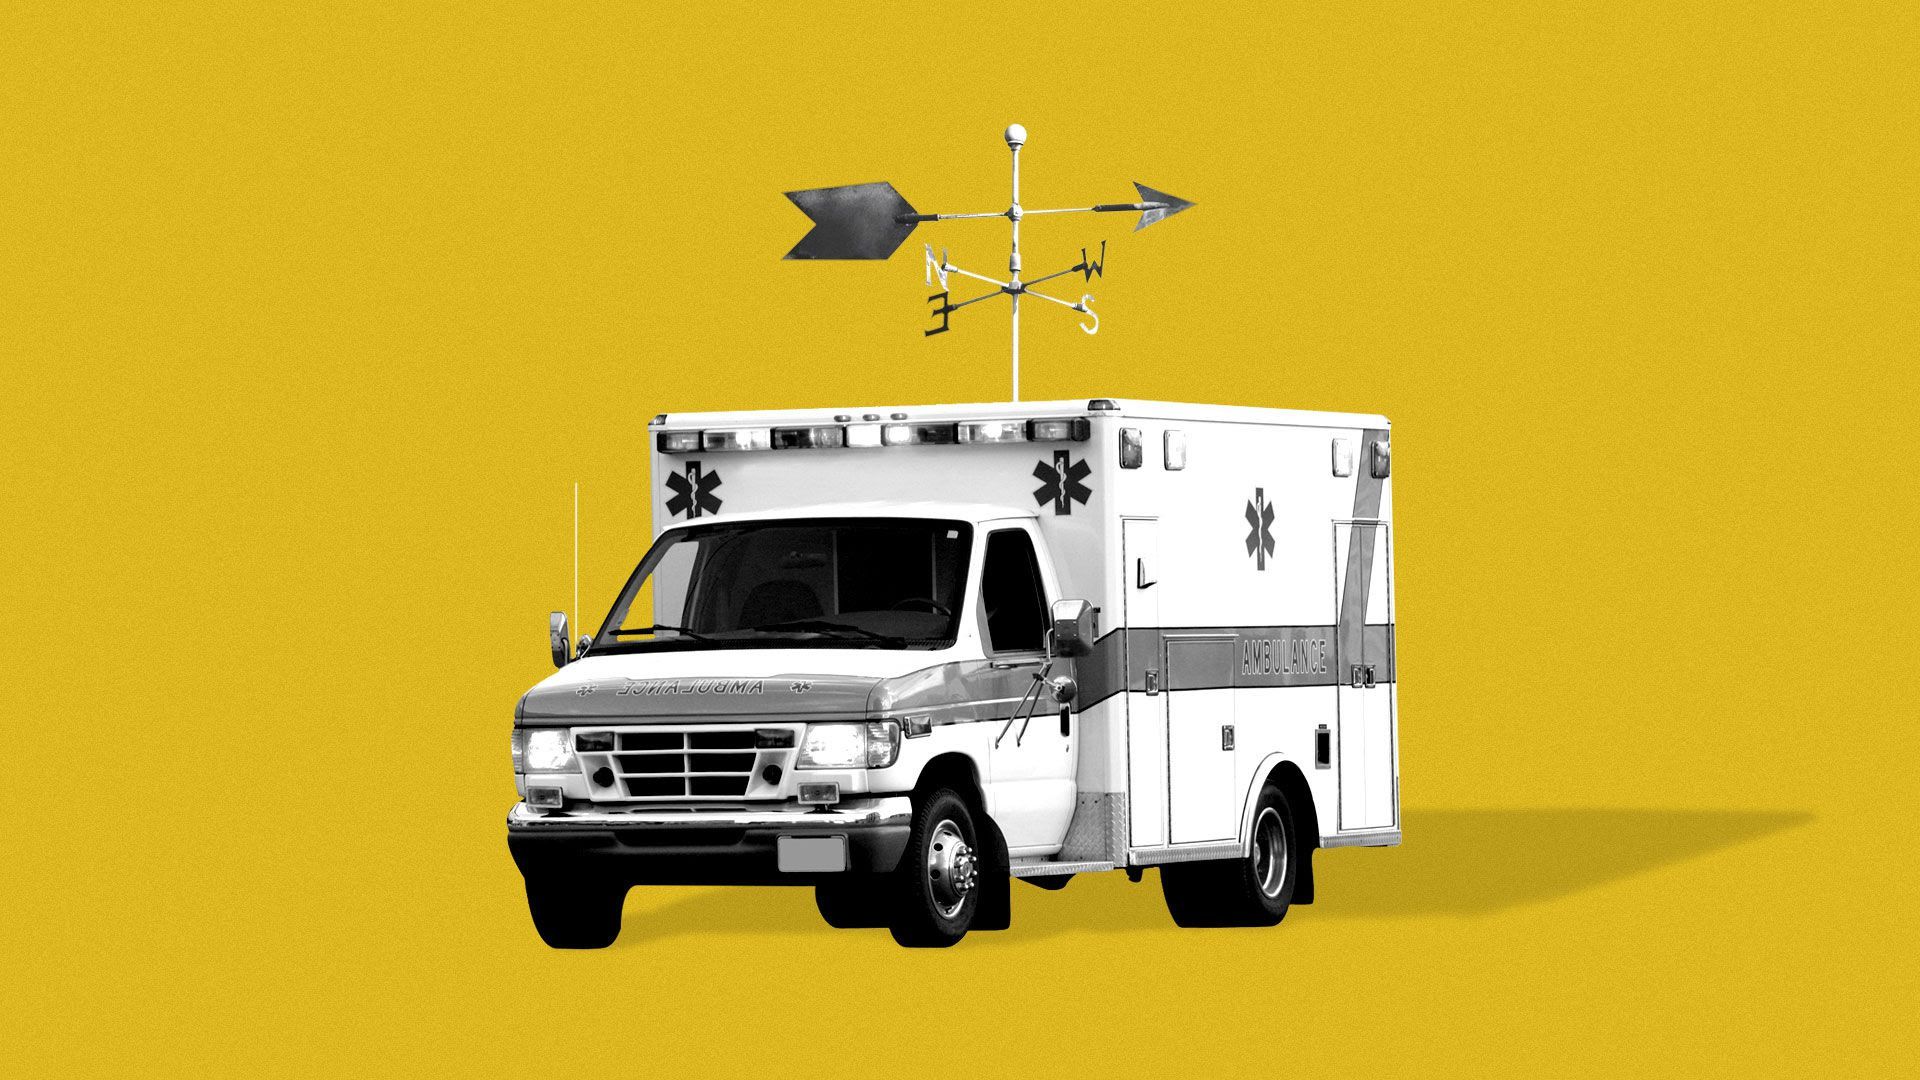 An illustration of an ambulance trying to following a weathervane